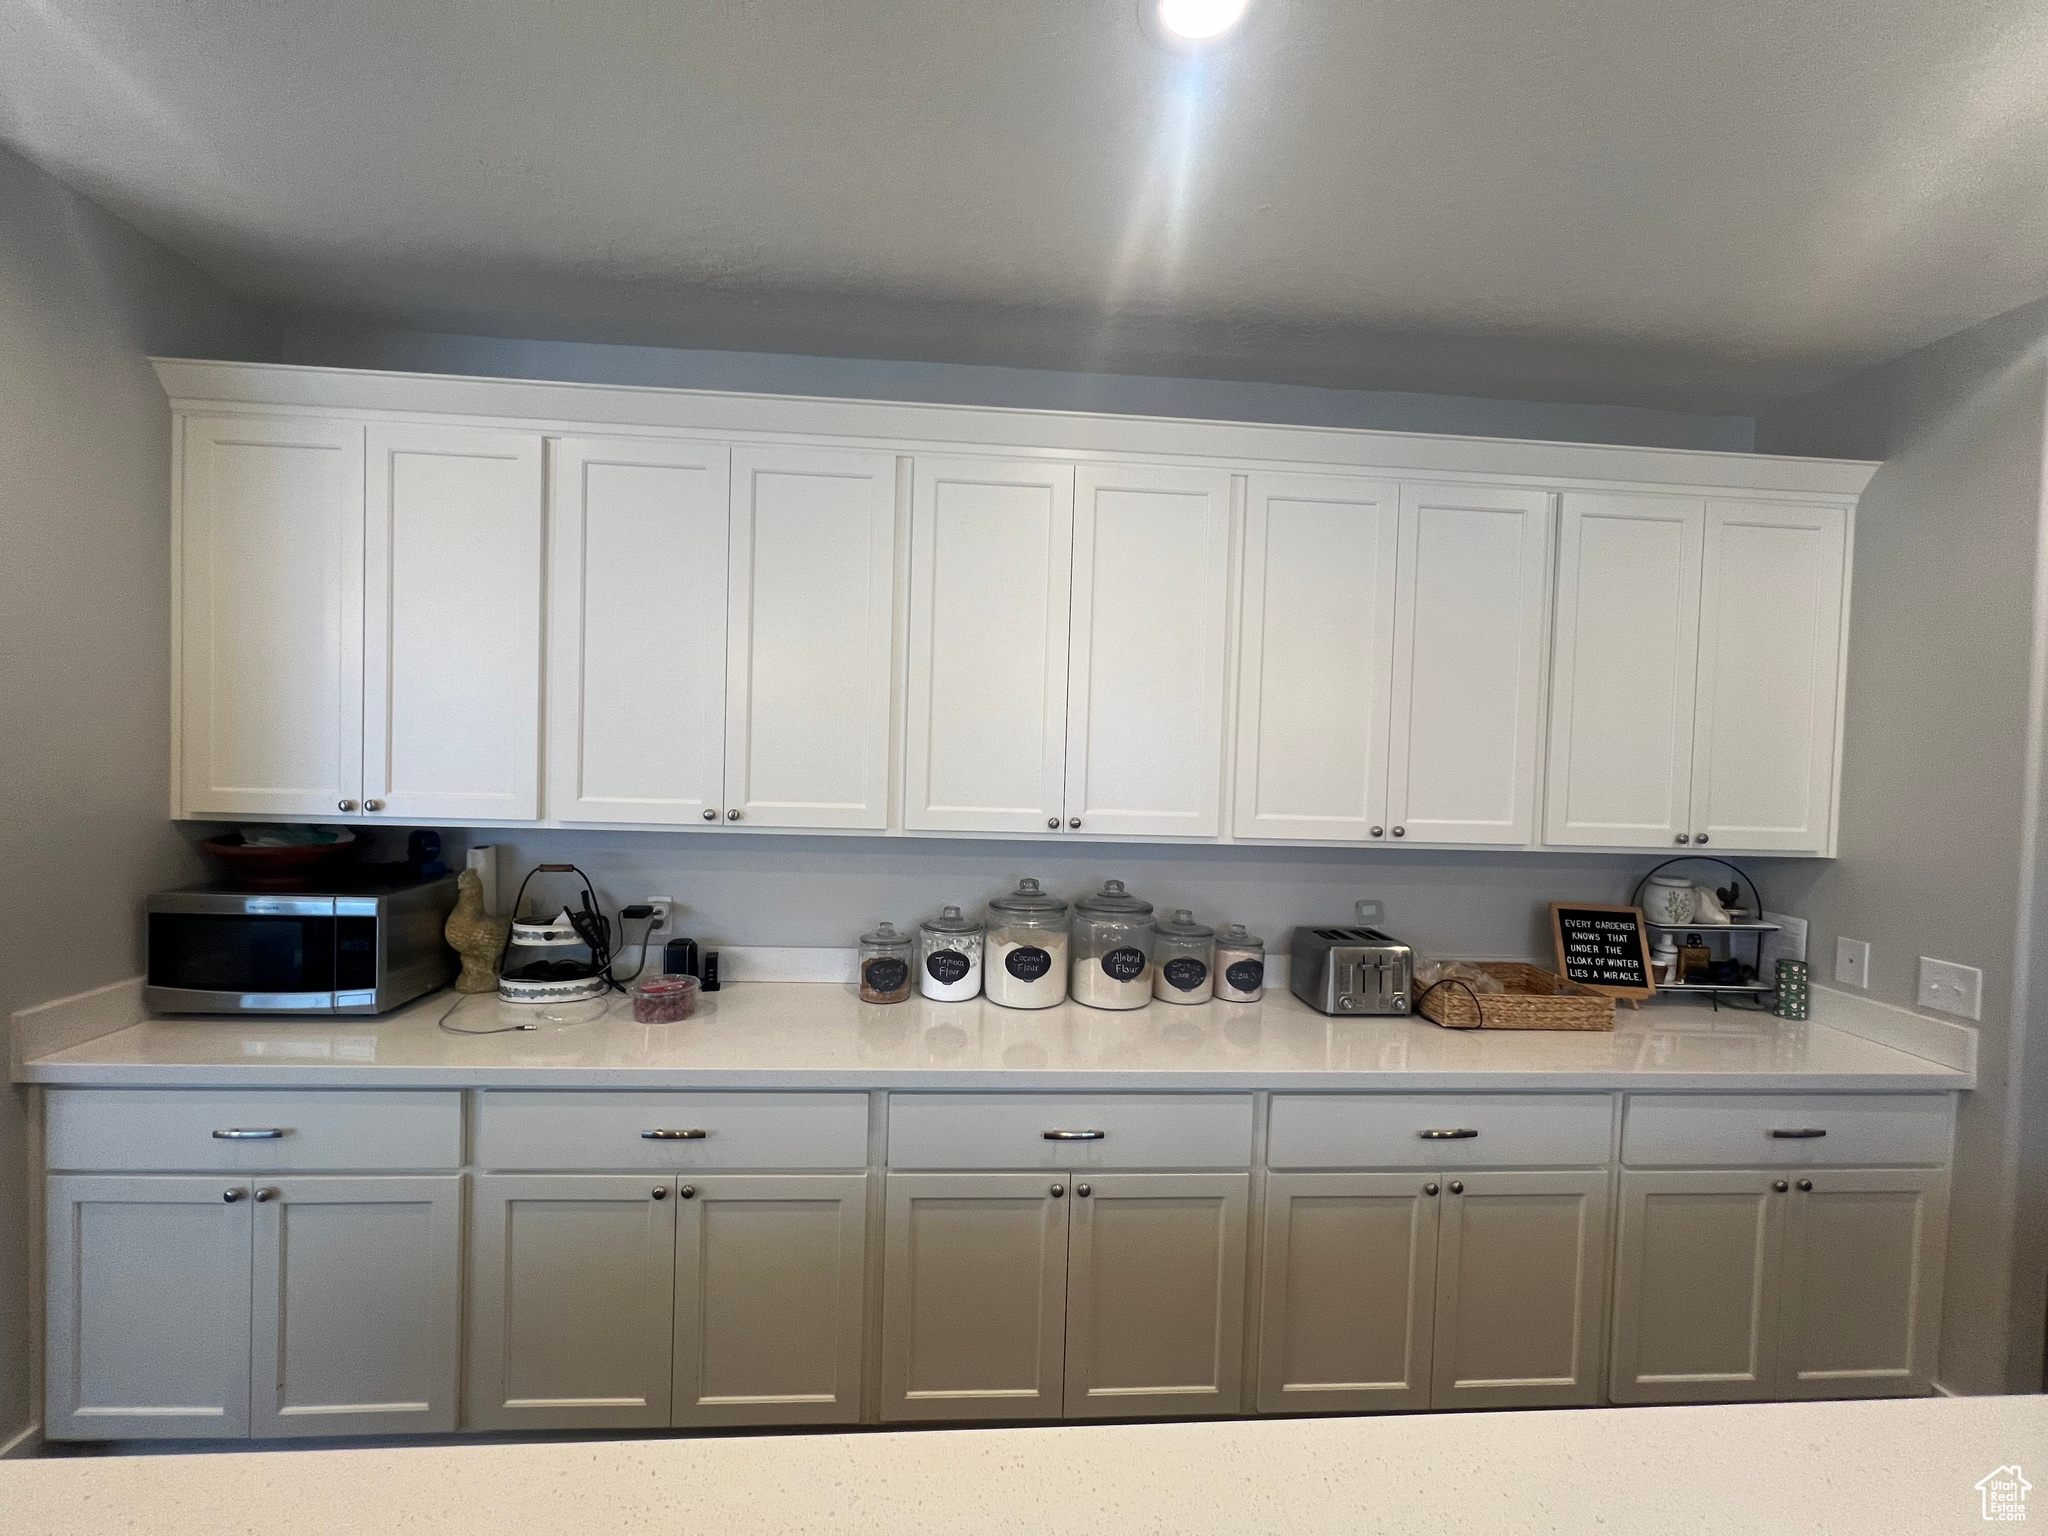 Kitchen featuring white cabinets